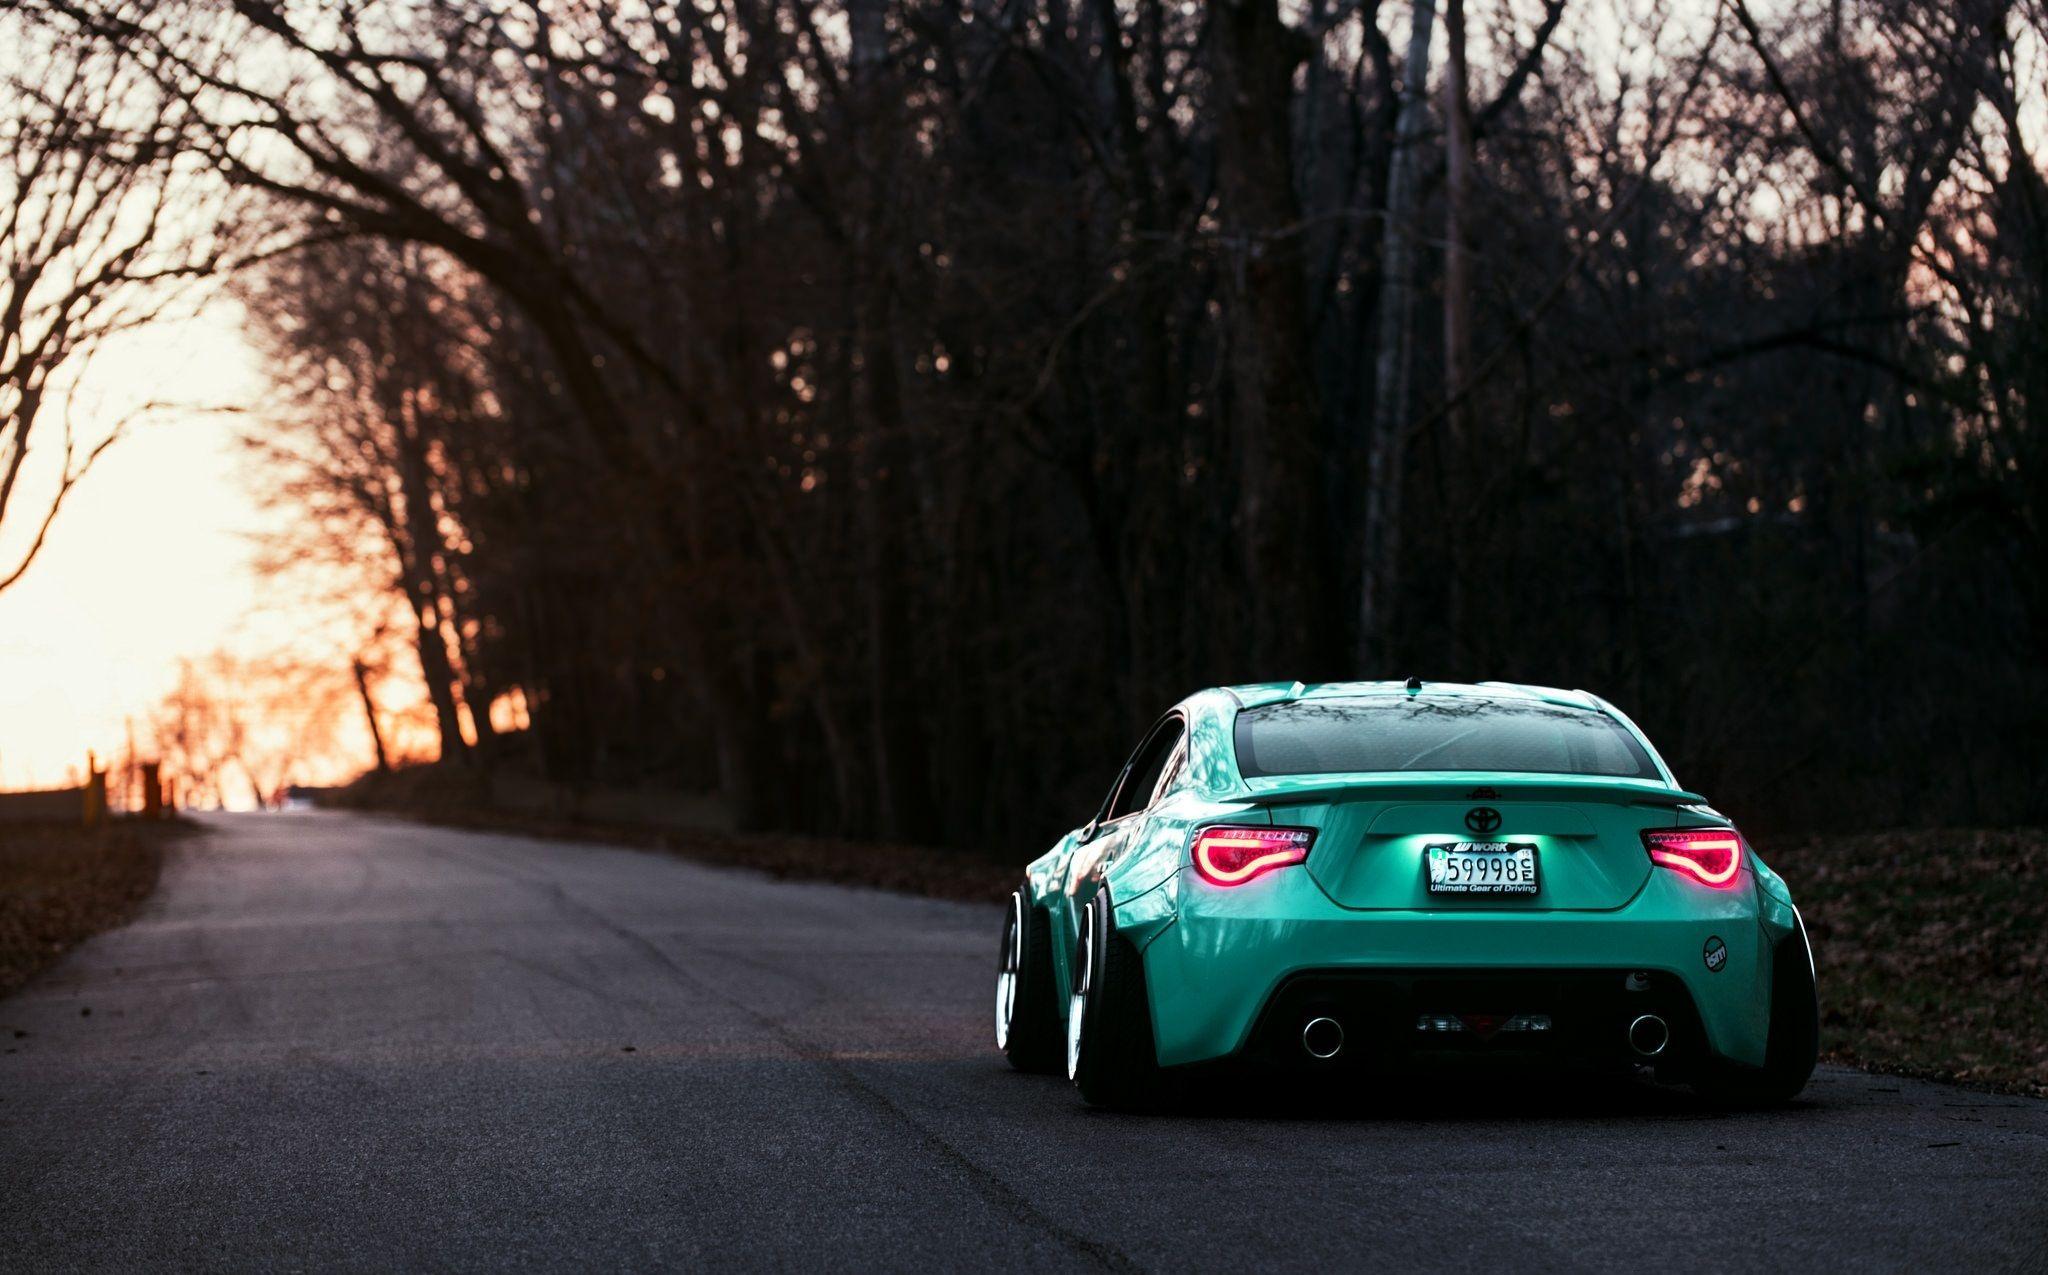 Stanced Car Wallpaper Tv - Cars Gallery